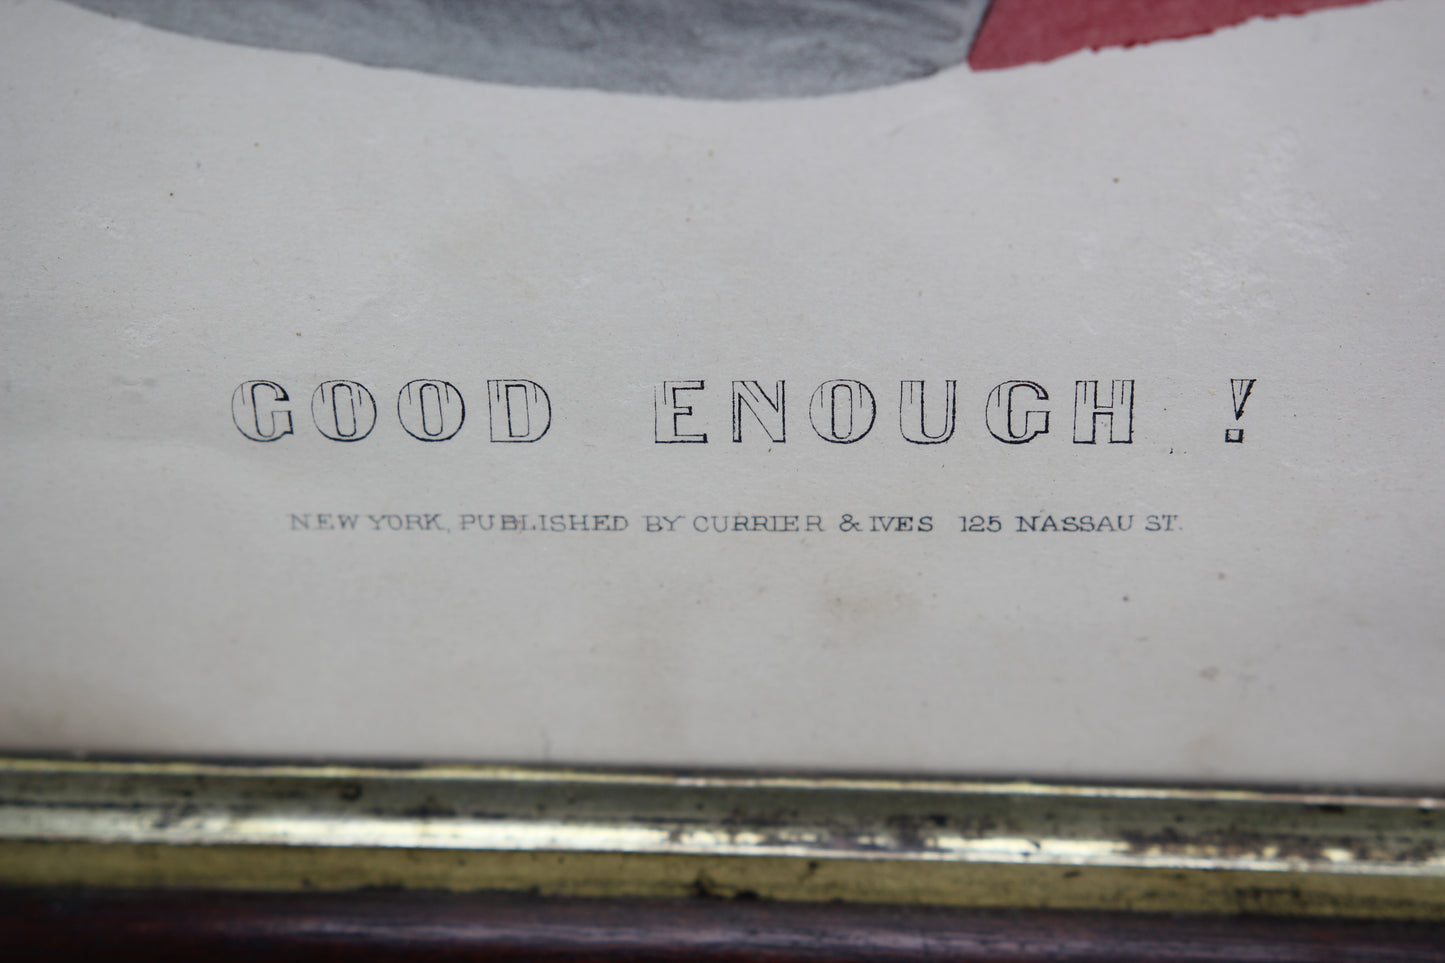 Currier & Ives "Good Enough!" Antique Lithograph Color Print in Frame - 16.25" x 18.25"